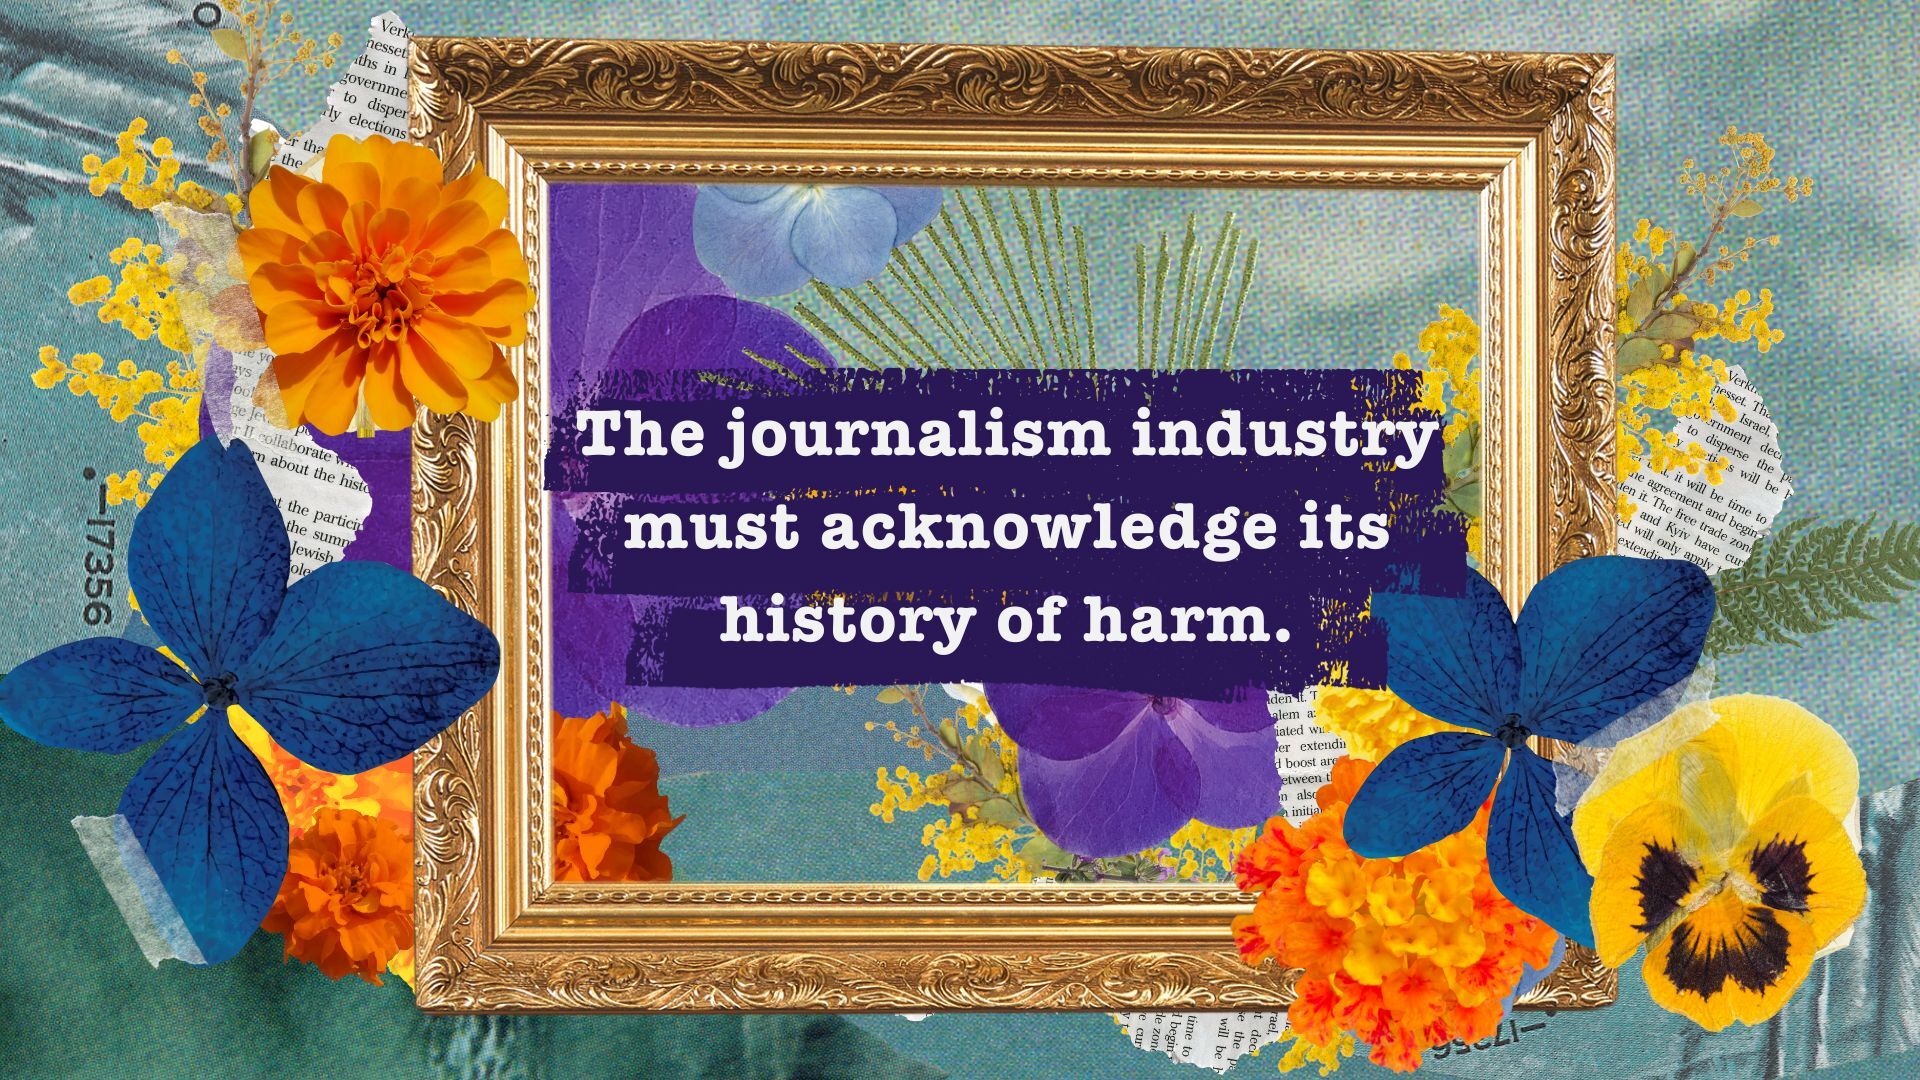 "The journalism industry must acknowledge its history of harm" inside a picture frame surrounded by flowers